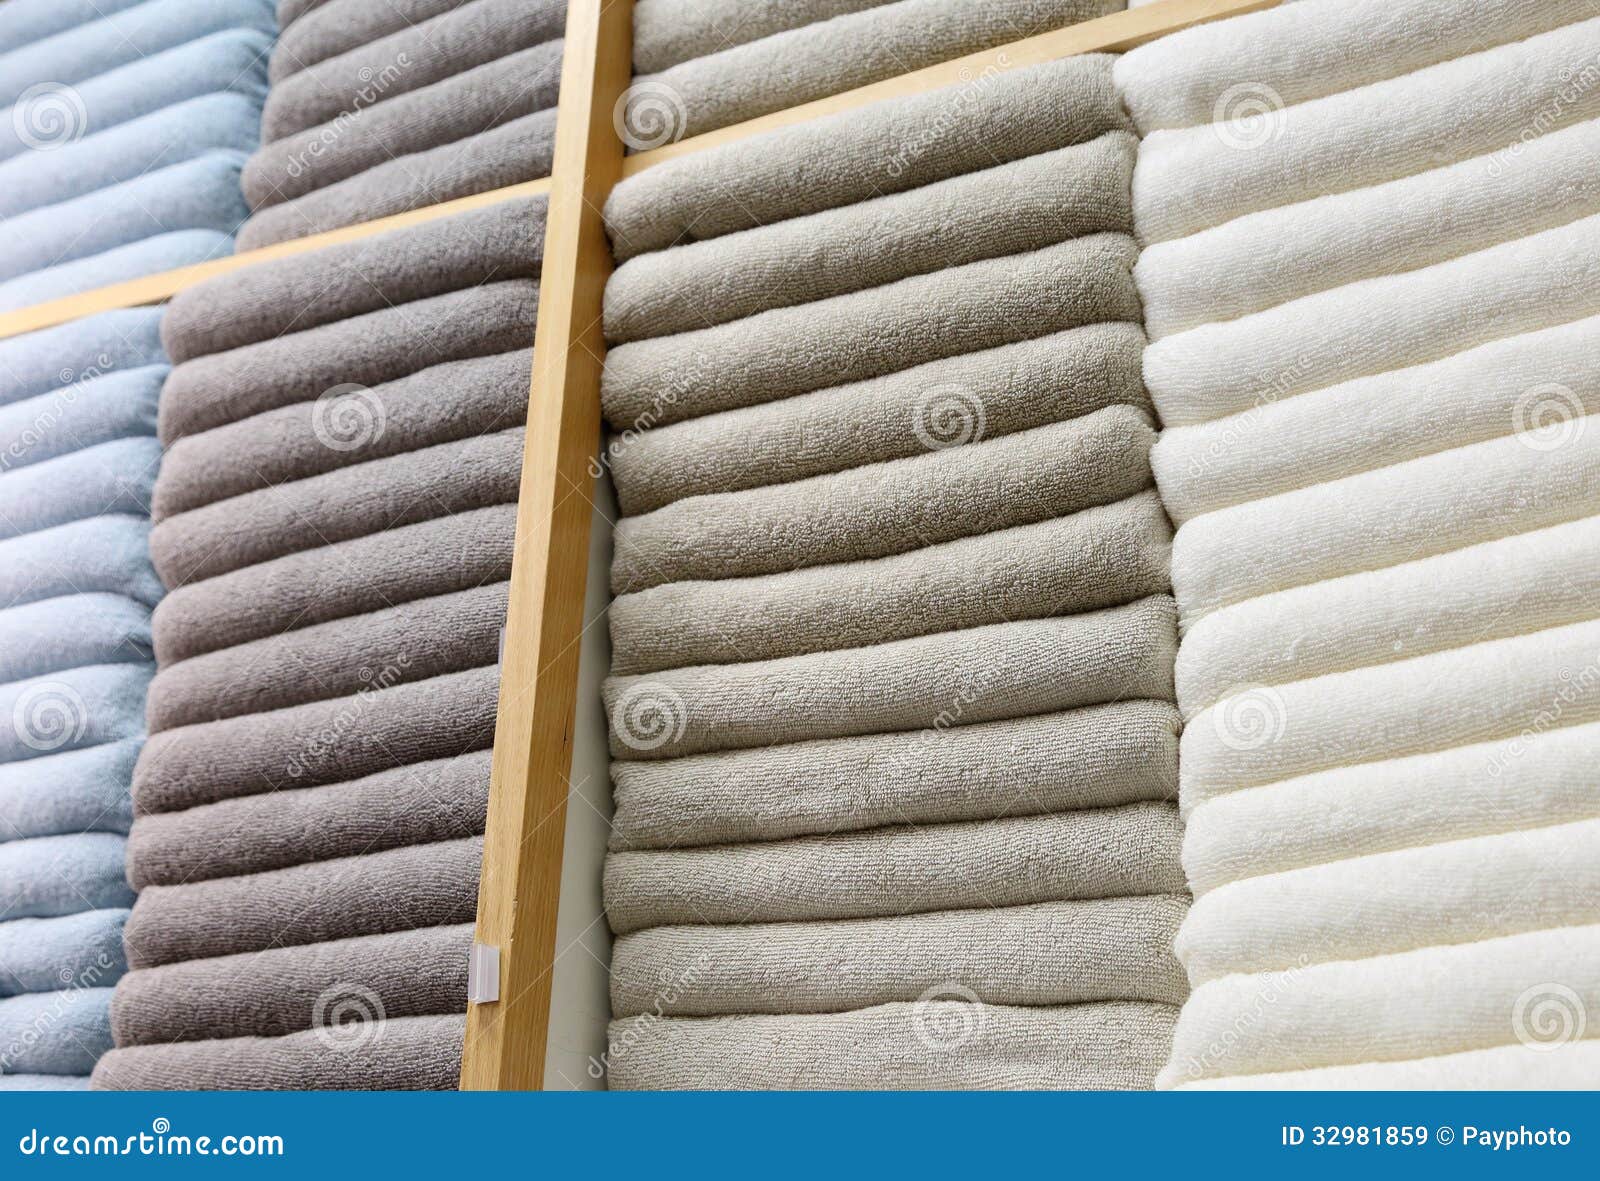 Towels on shelves stock image. Image of cotton, column - 32981859